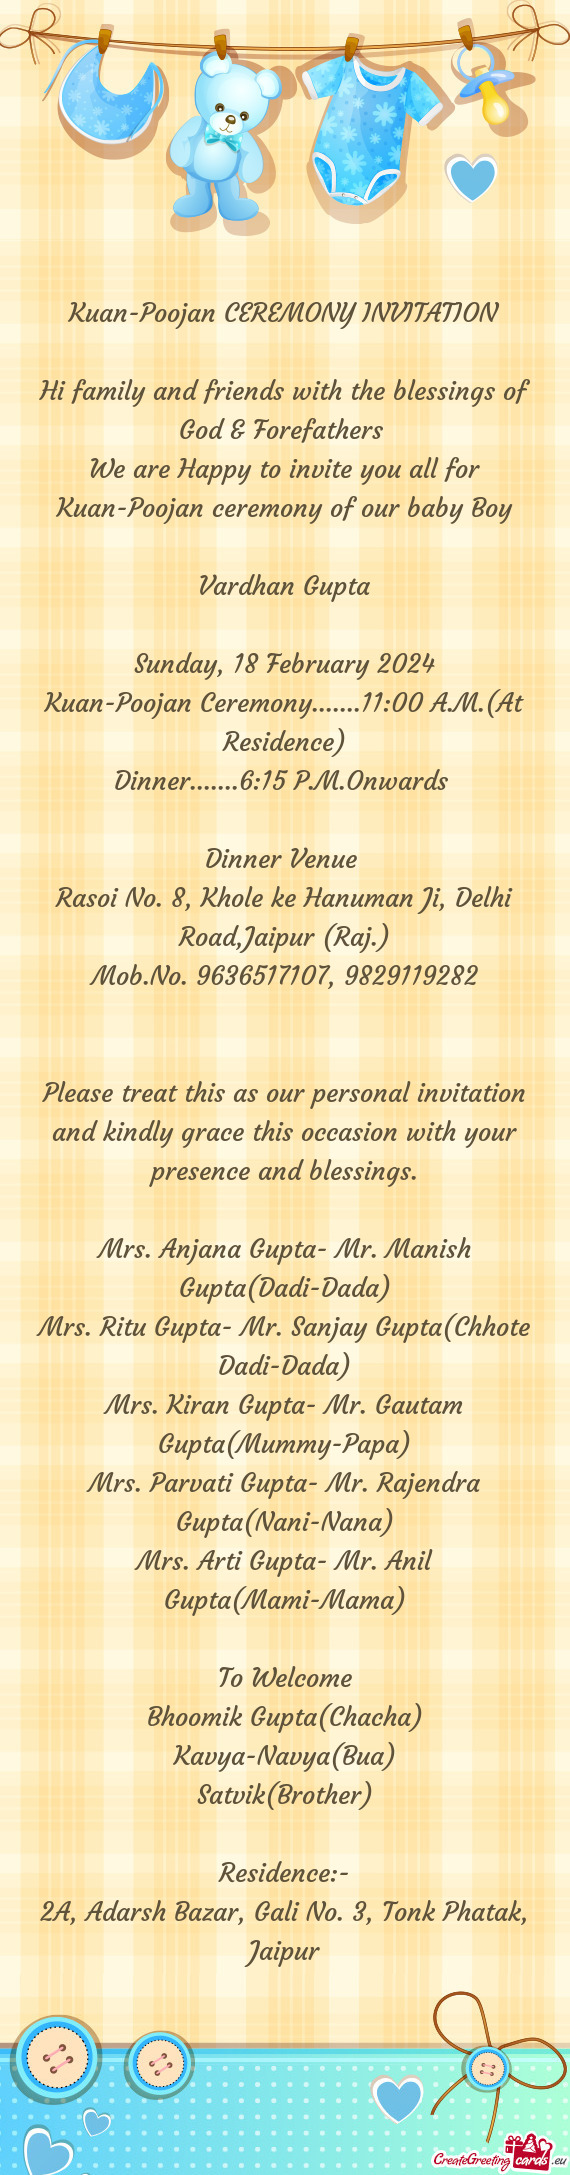 We are Happy to invite you all for Kuan-Poojan ceremony of our baby Boy